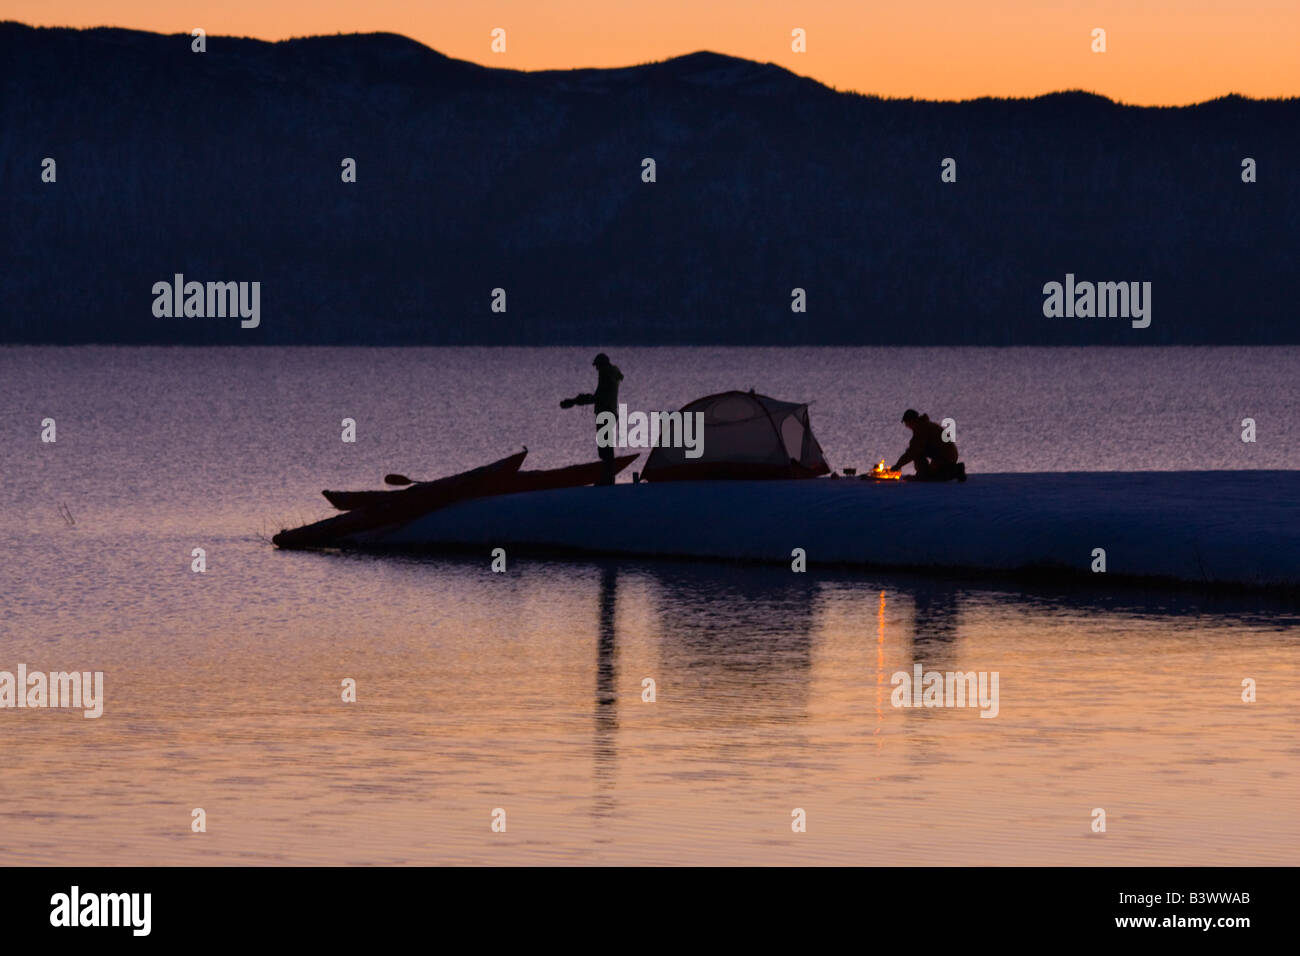 Silhouette of a man and a woman camping at the lakeside, Lake Tahoe, California, USA Stock Photo